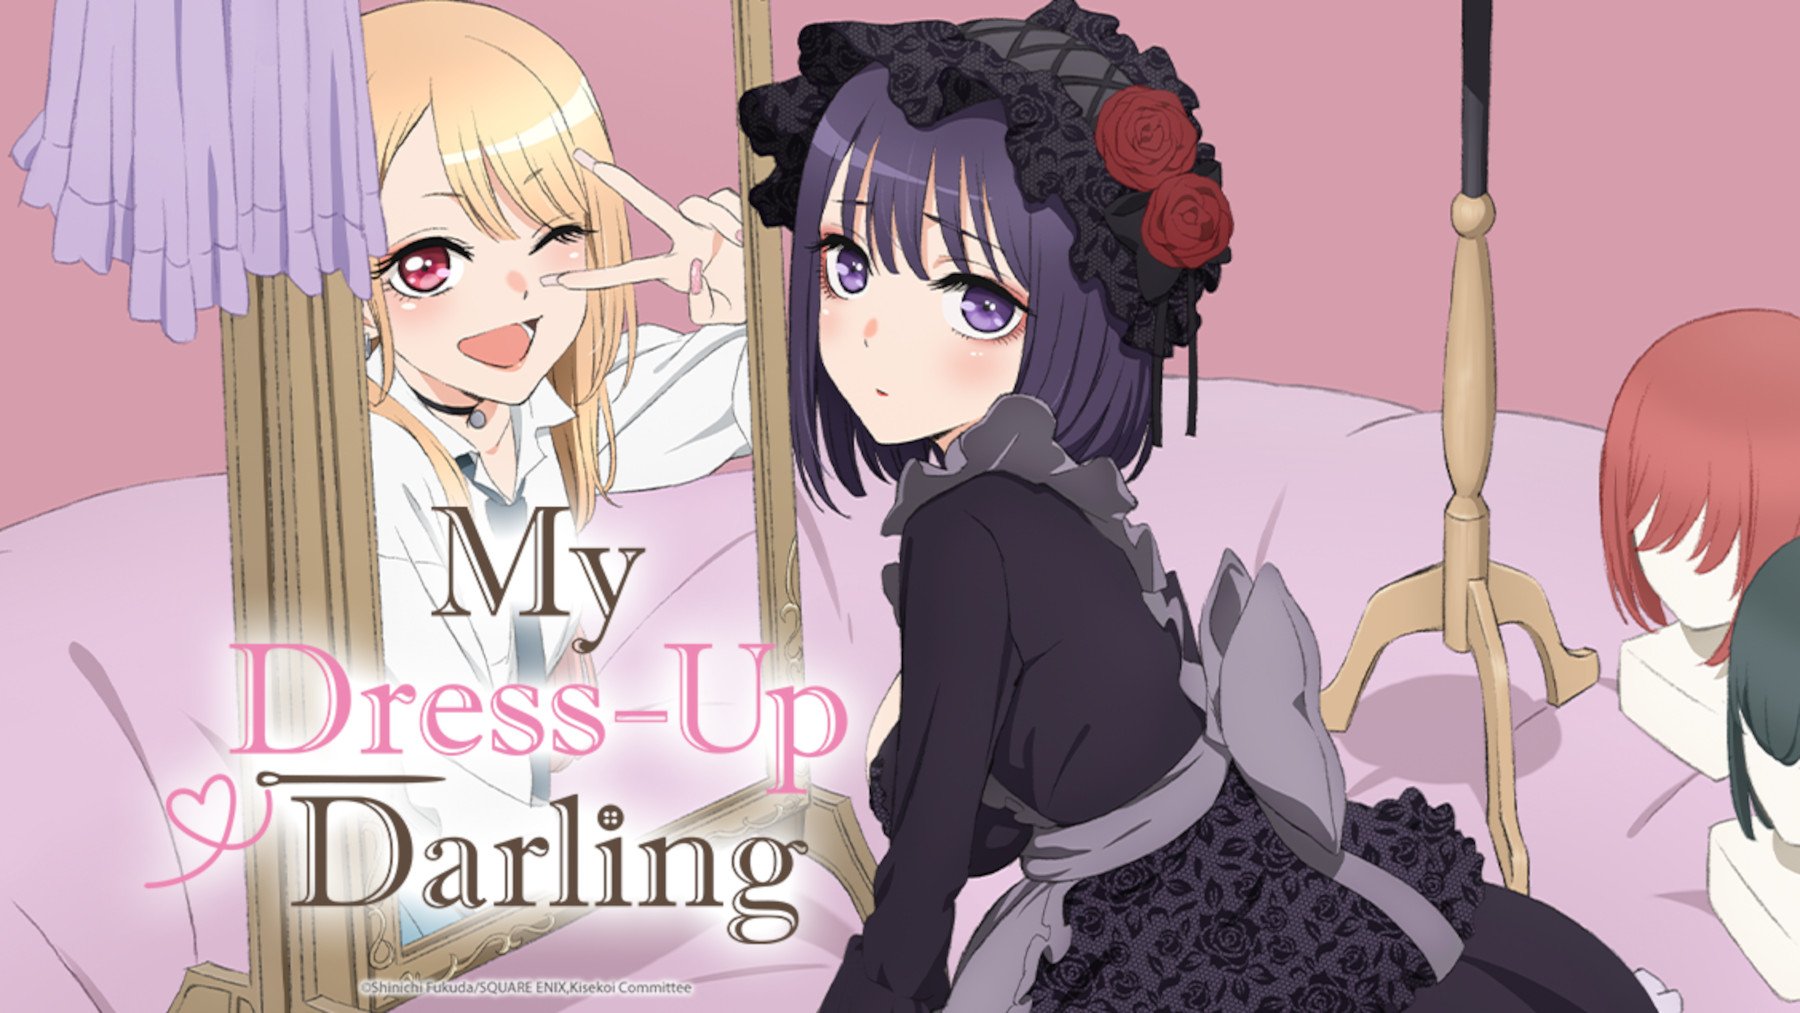 Key art for 'My Dress-Up Darling' showing Marin Kitagawa in cosplay and with her usual look.